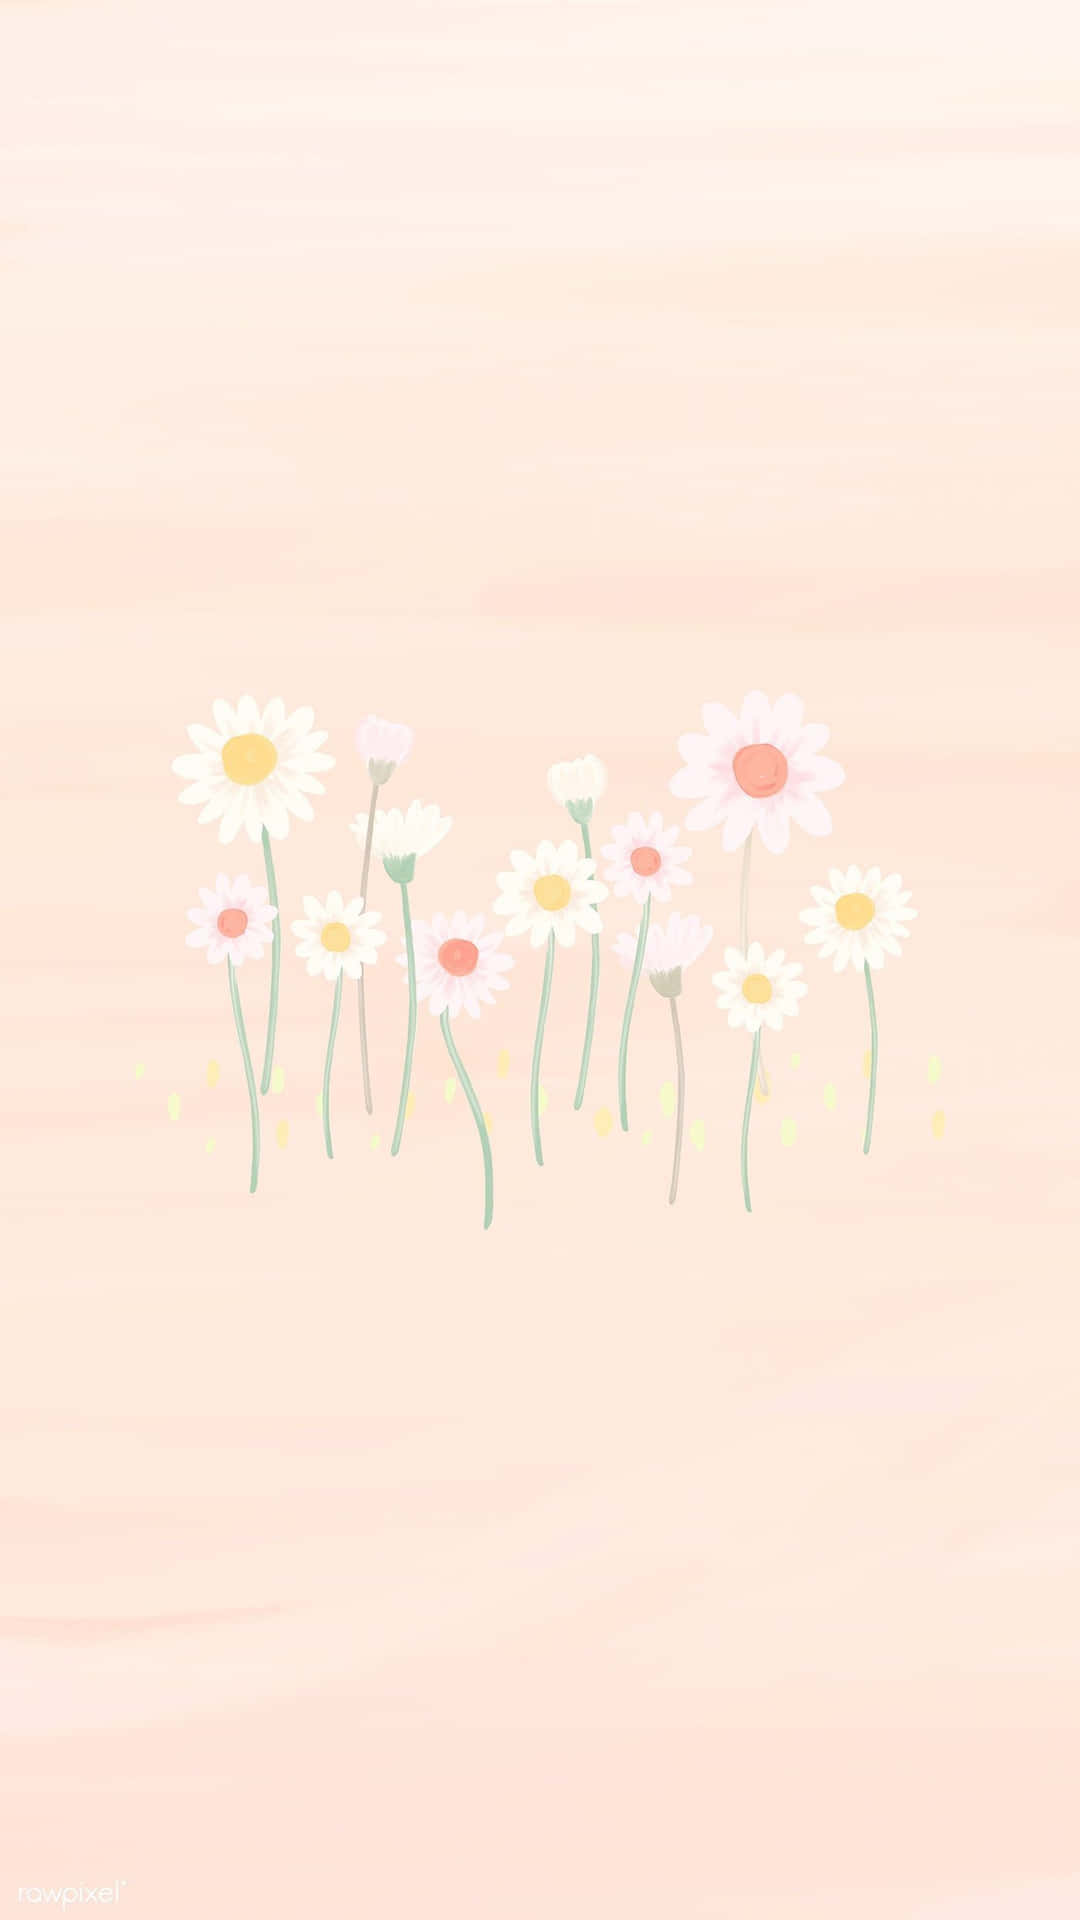 Spring pastel colors in a beautiful and relaxing nature scene Wallpaper